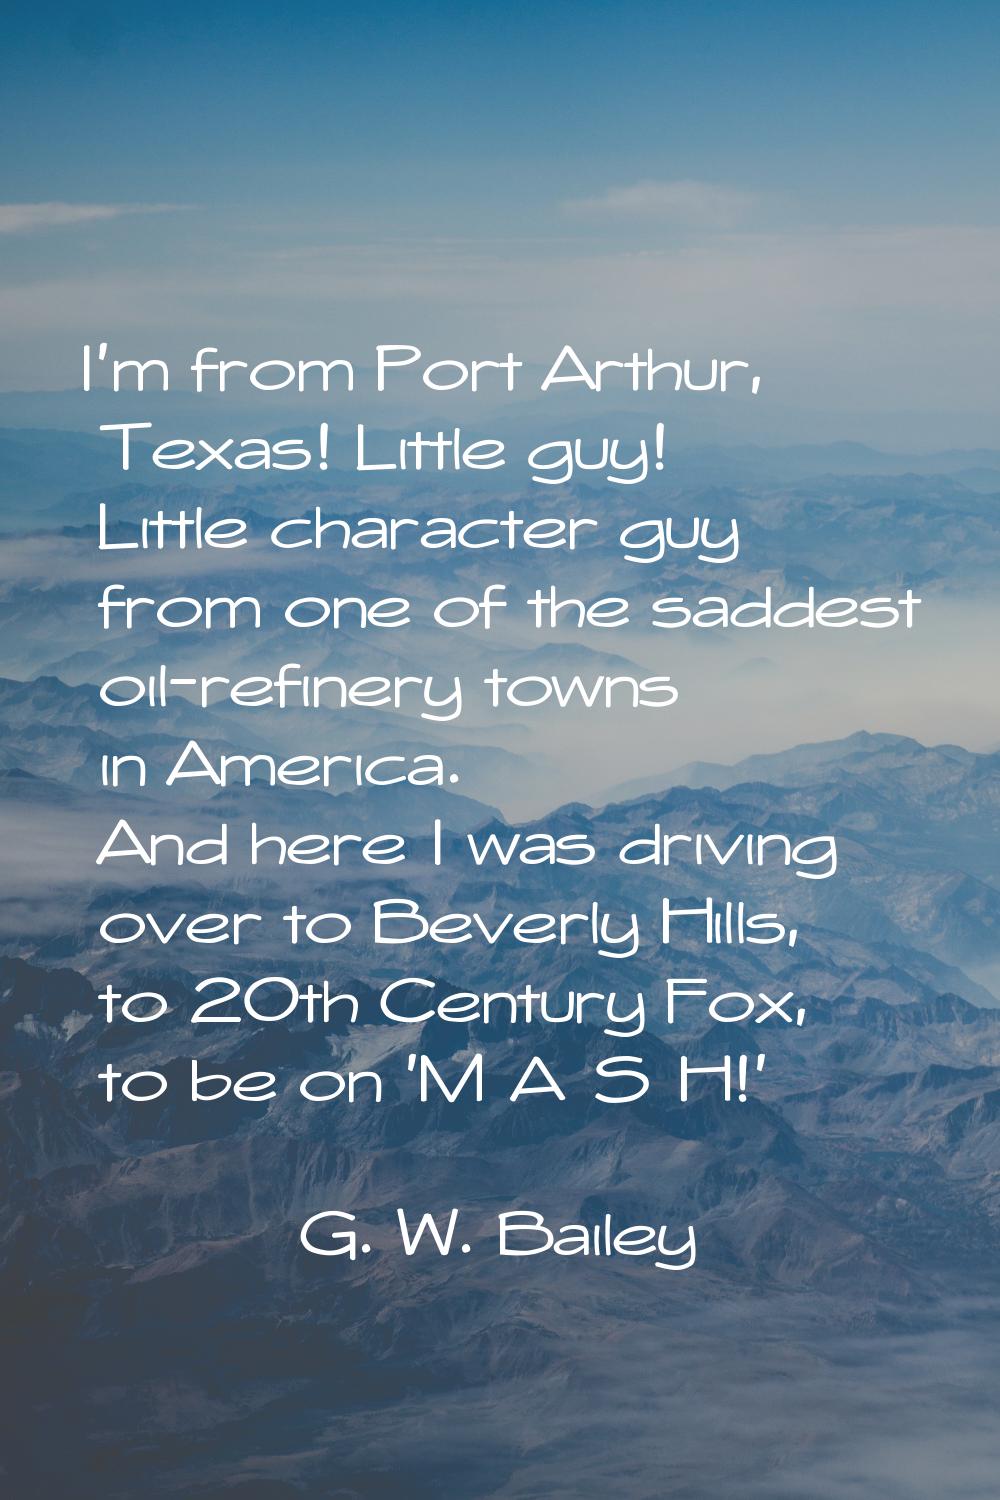 I'm from Port Arthur, Texas! Little guy! Little character guy from one of the saddest oil-refinery 